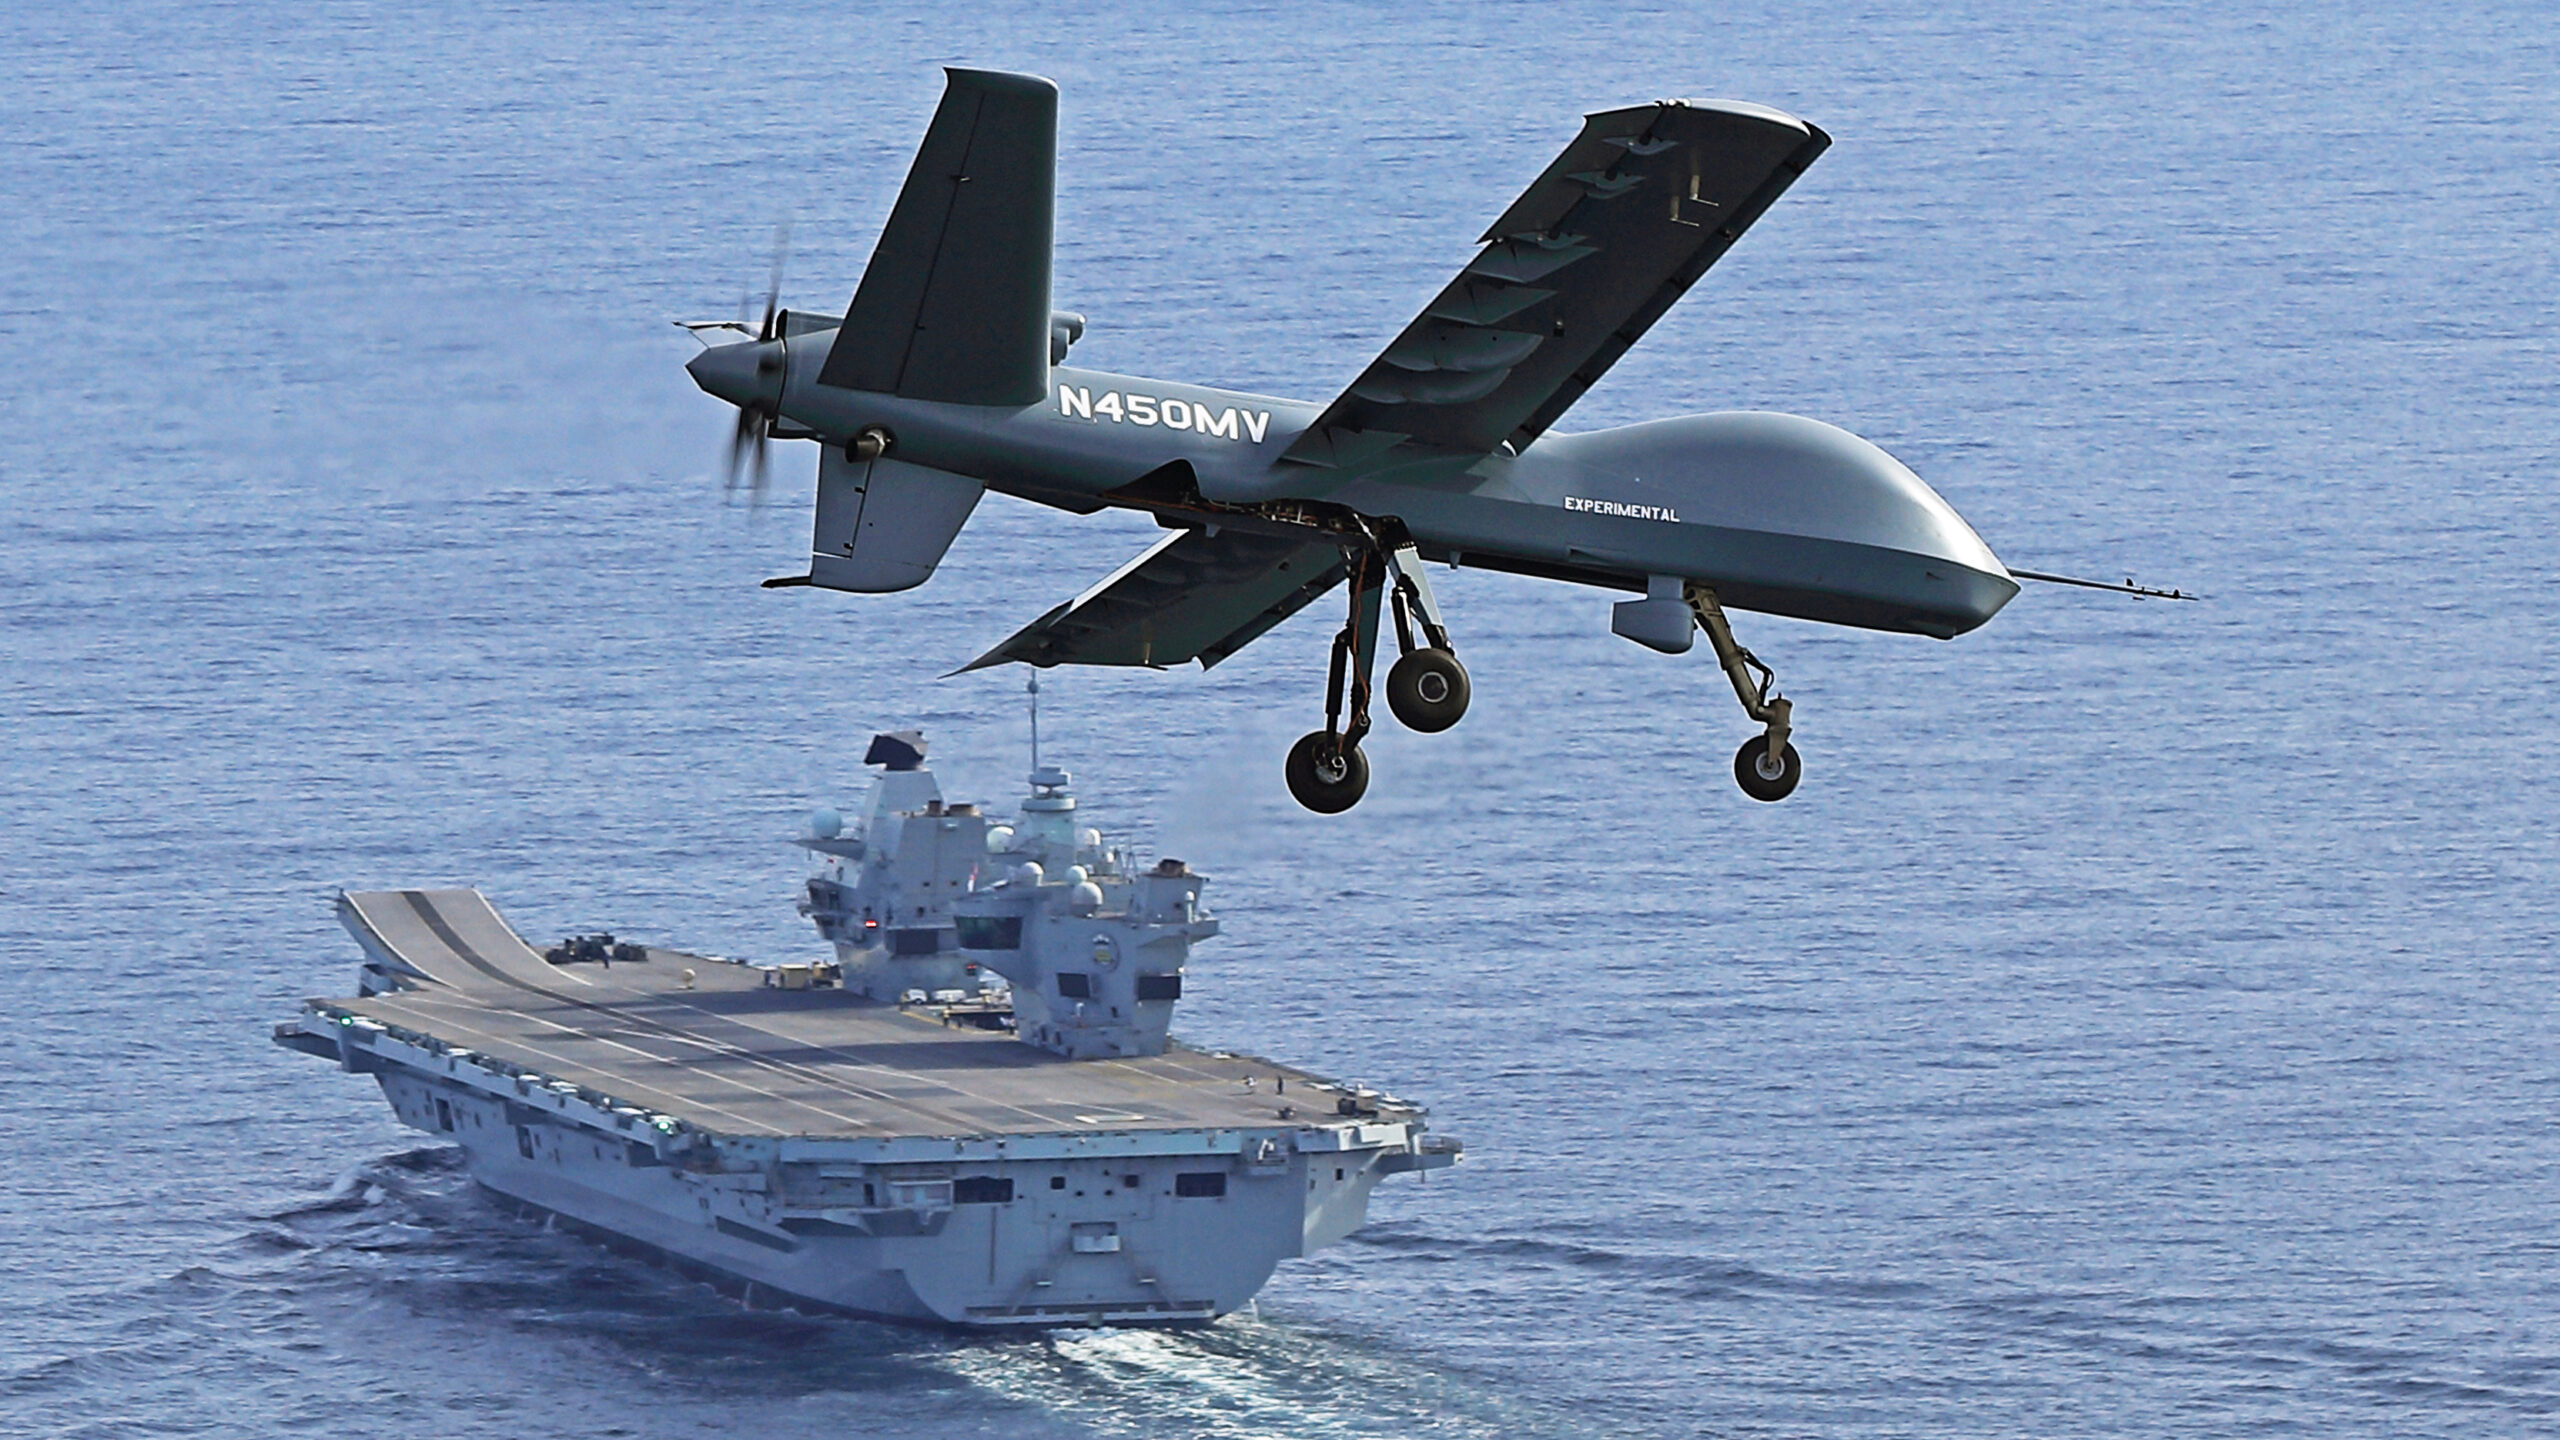 Mojave Drone lands on aircraft carrier